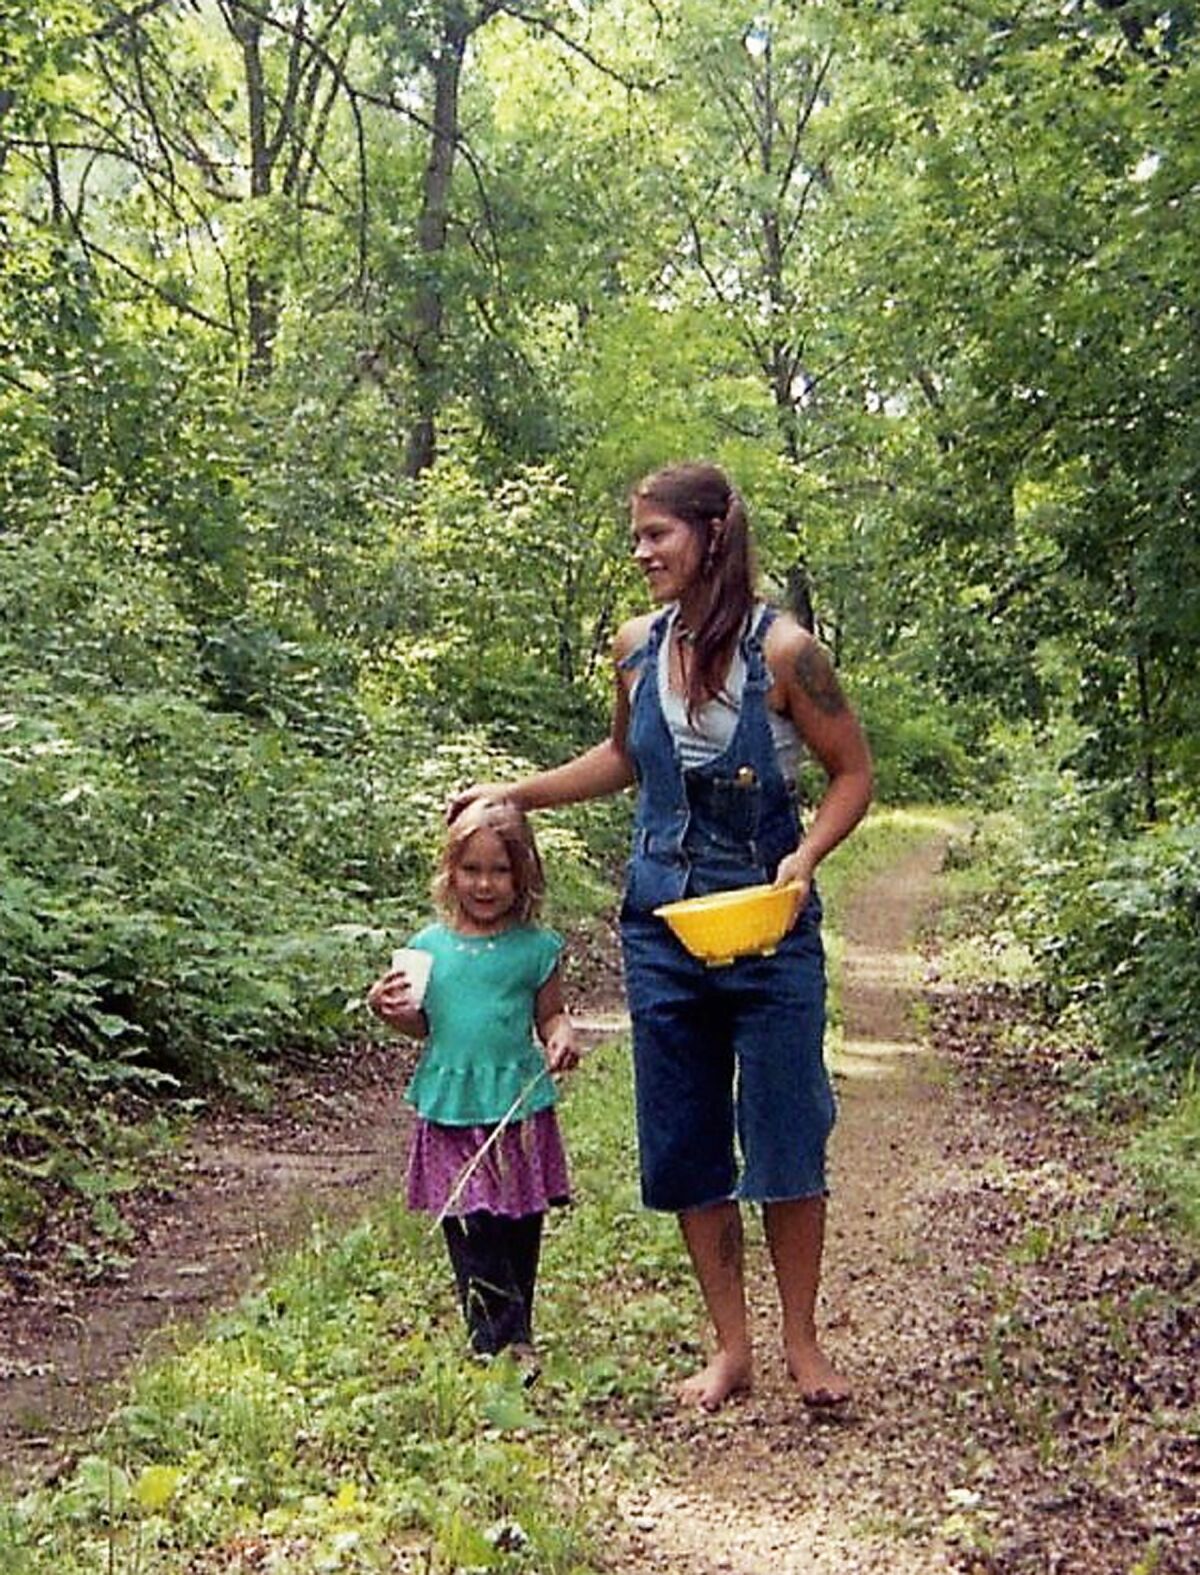 In happier times, Shyloh and Andrea Nelson while berry picking in 1993.